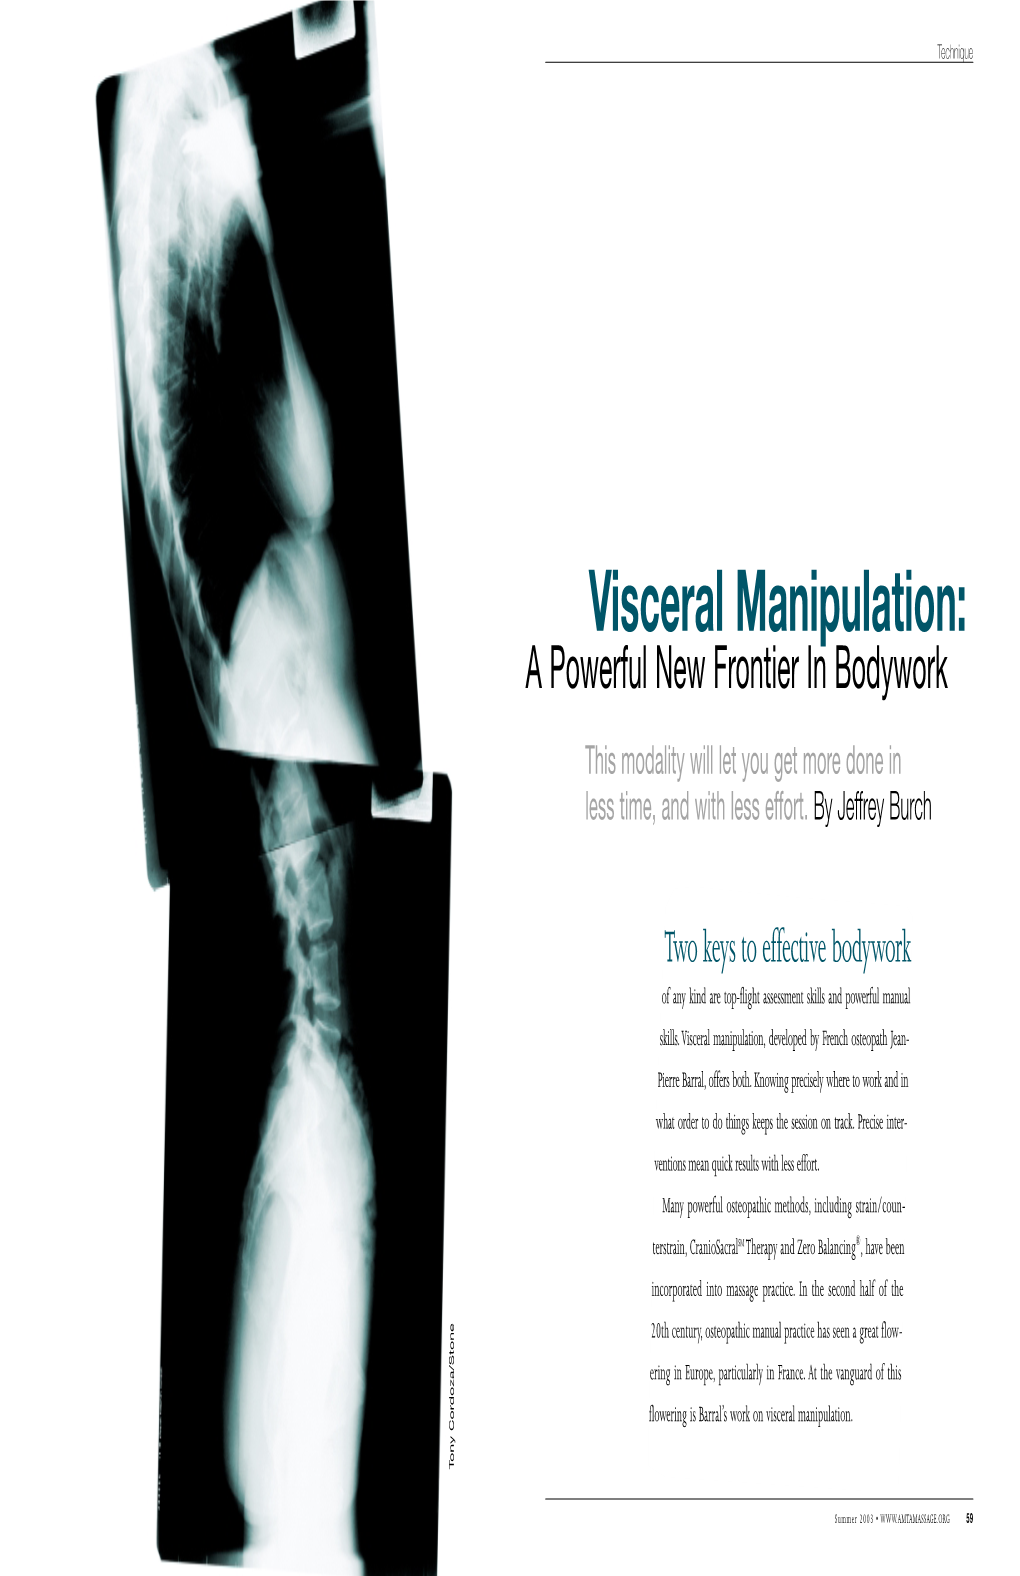 Visceral Manipulation: a Powerful New Frontier in Bodywork